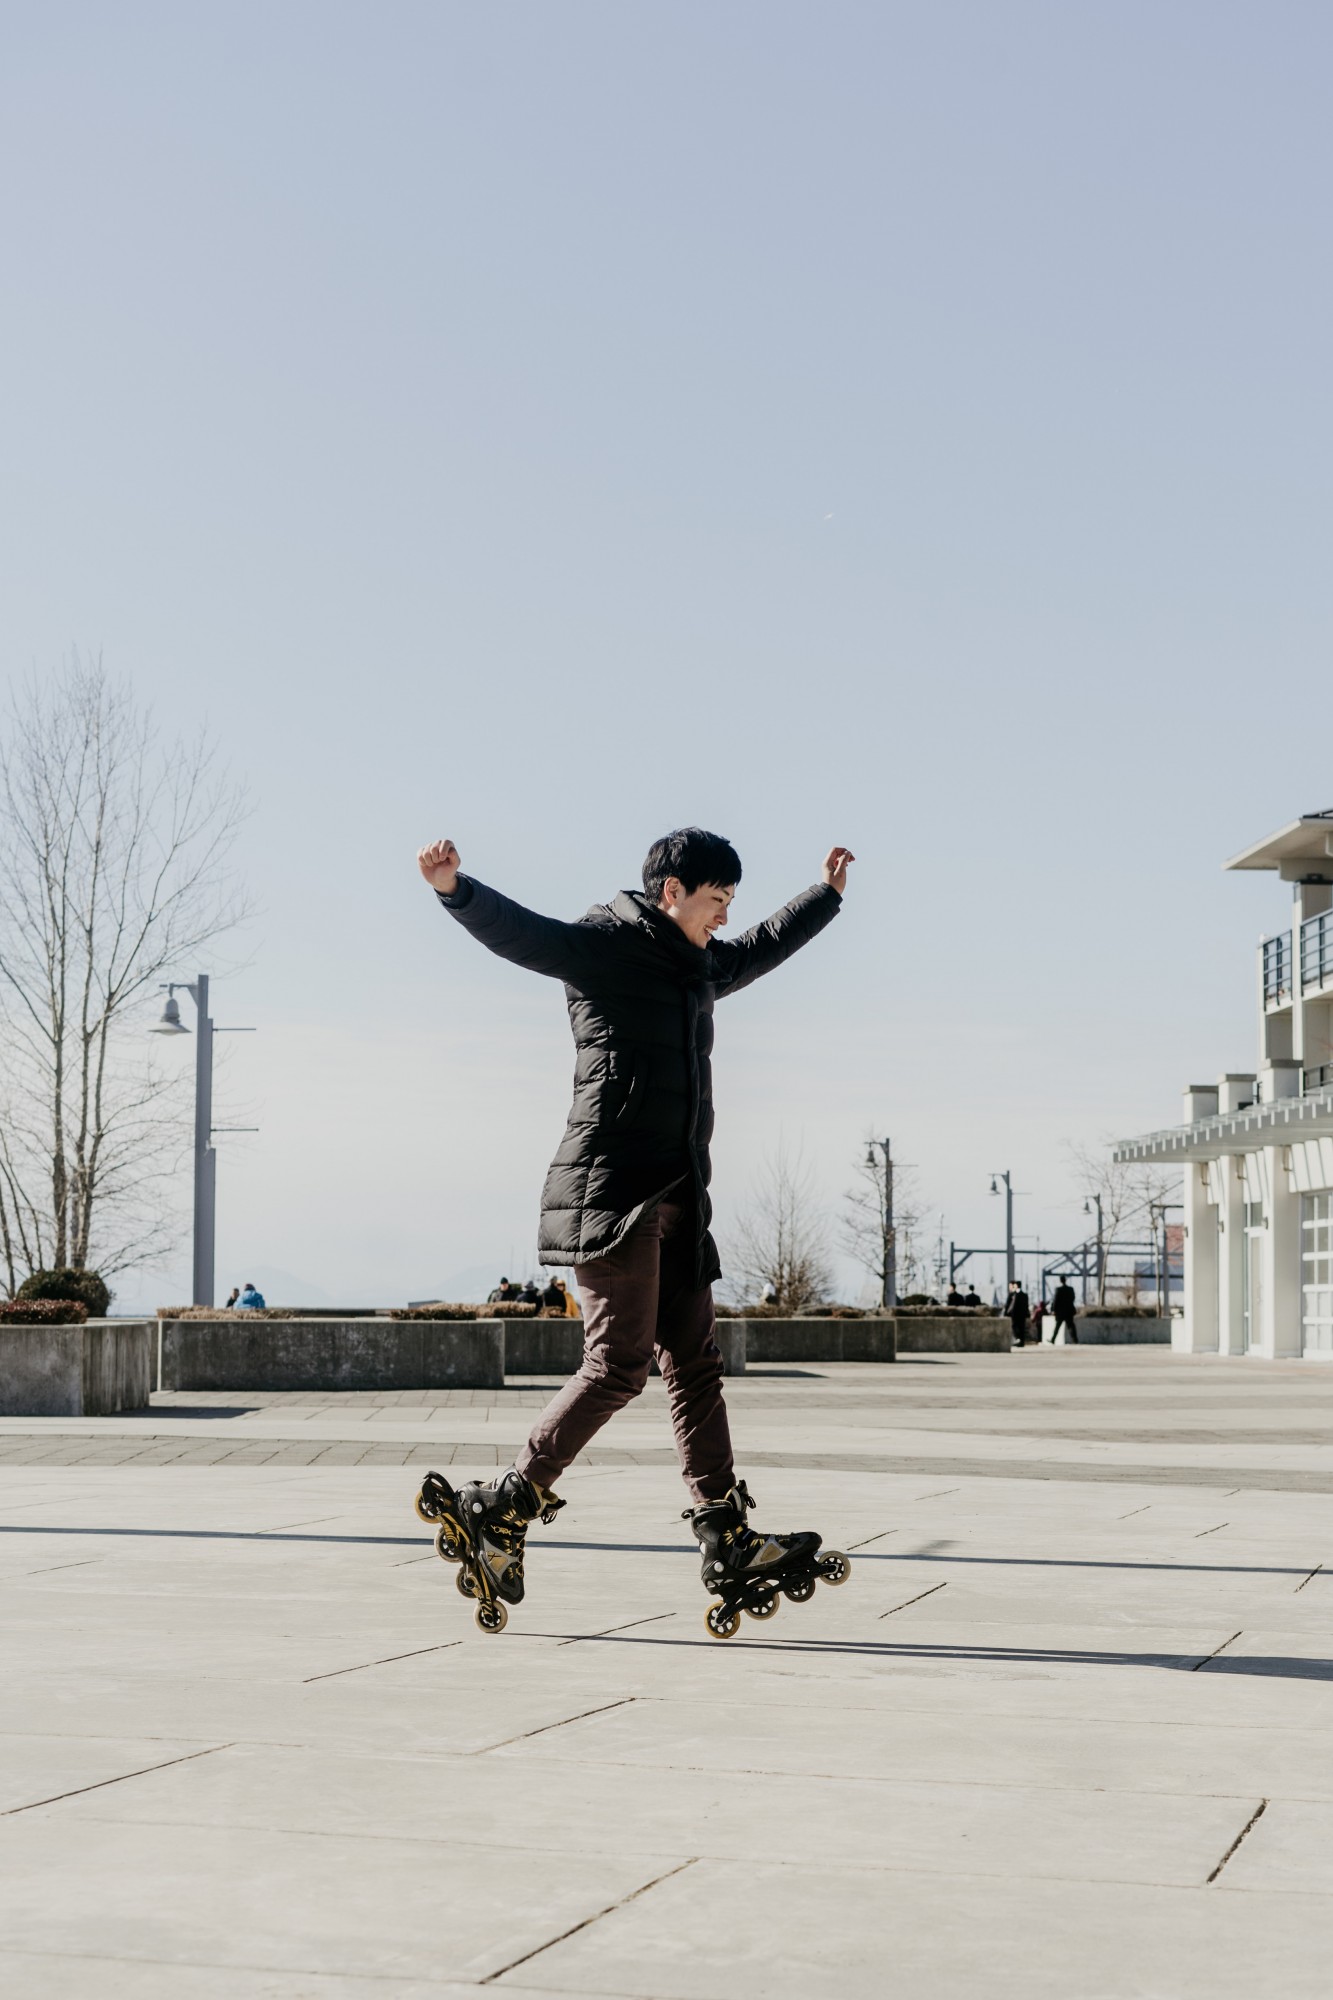 A man on rollerblades with his hands in the air.